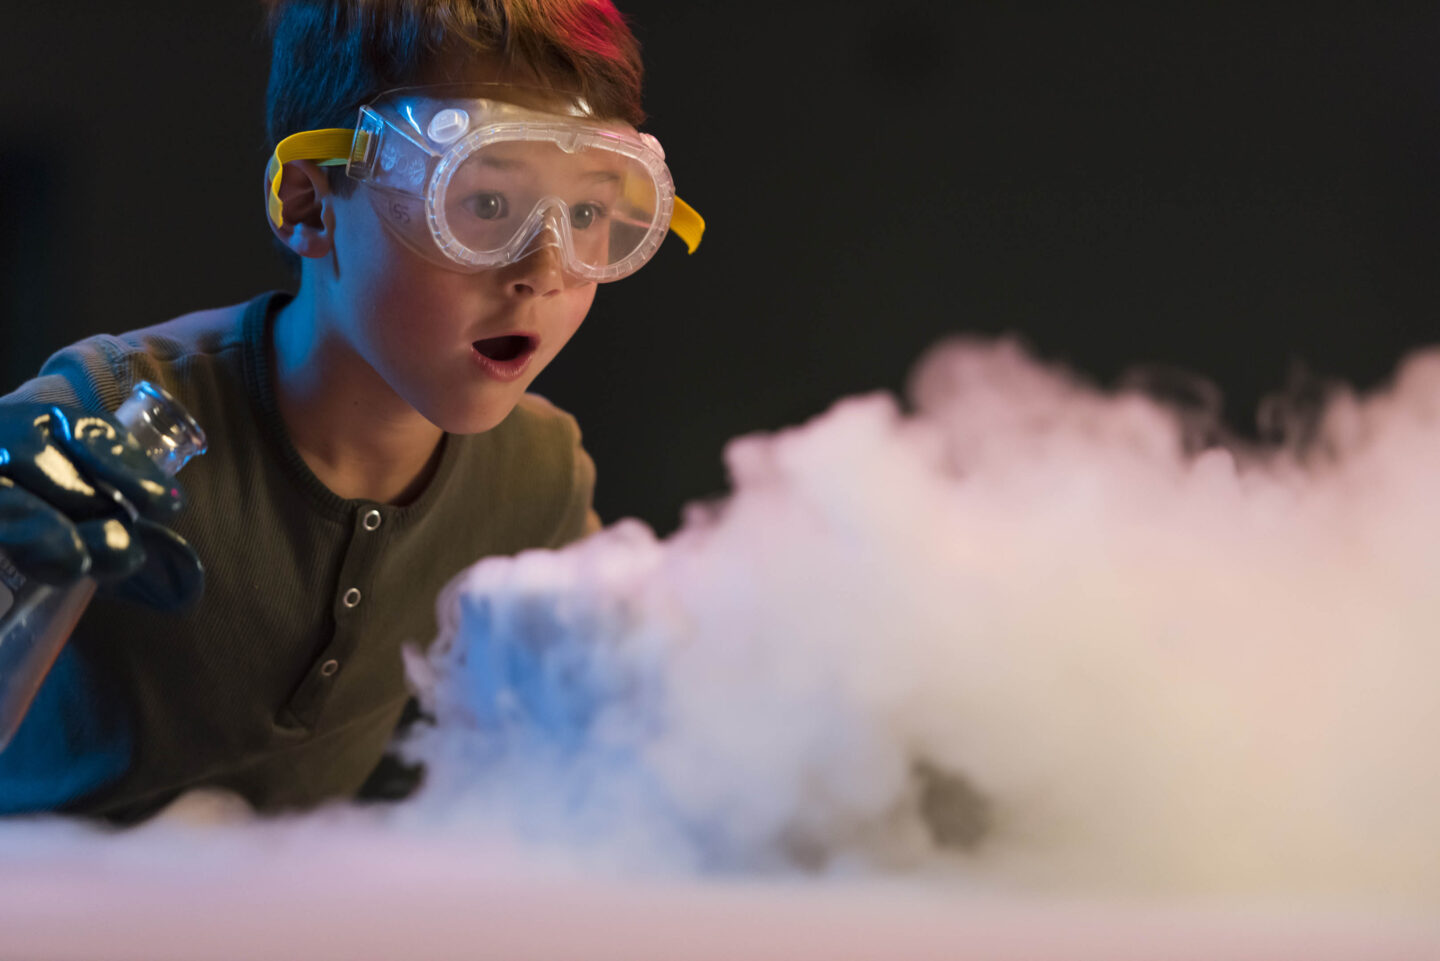 A young person wears safety goggles while conducting a science experiment.